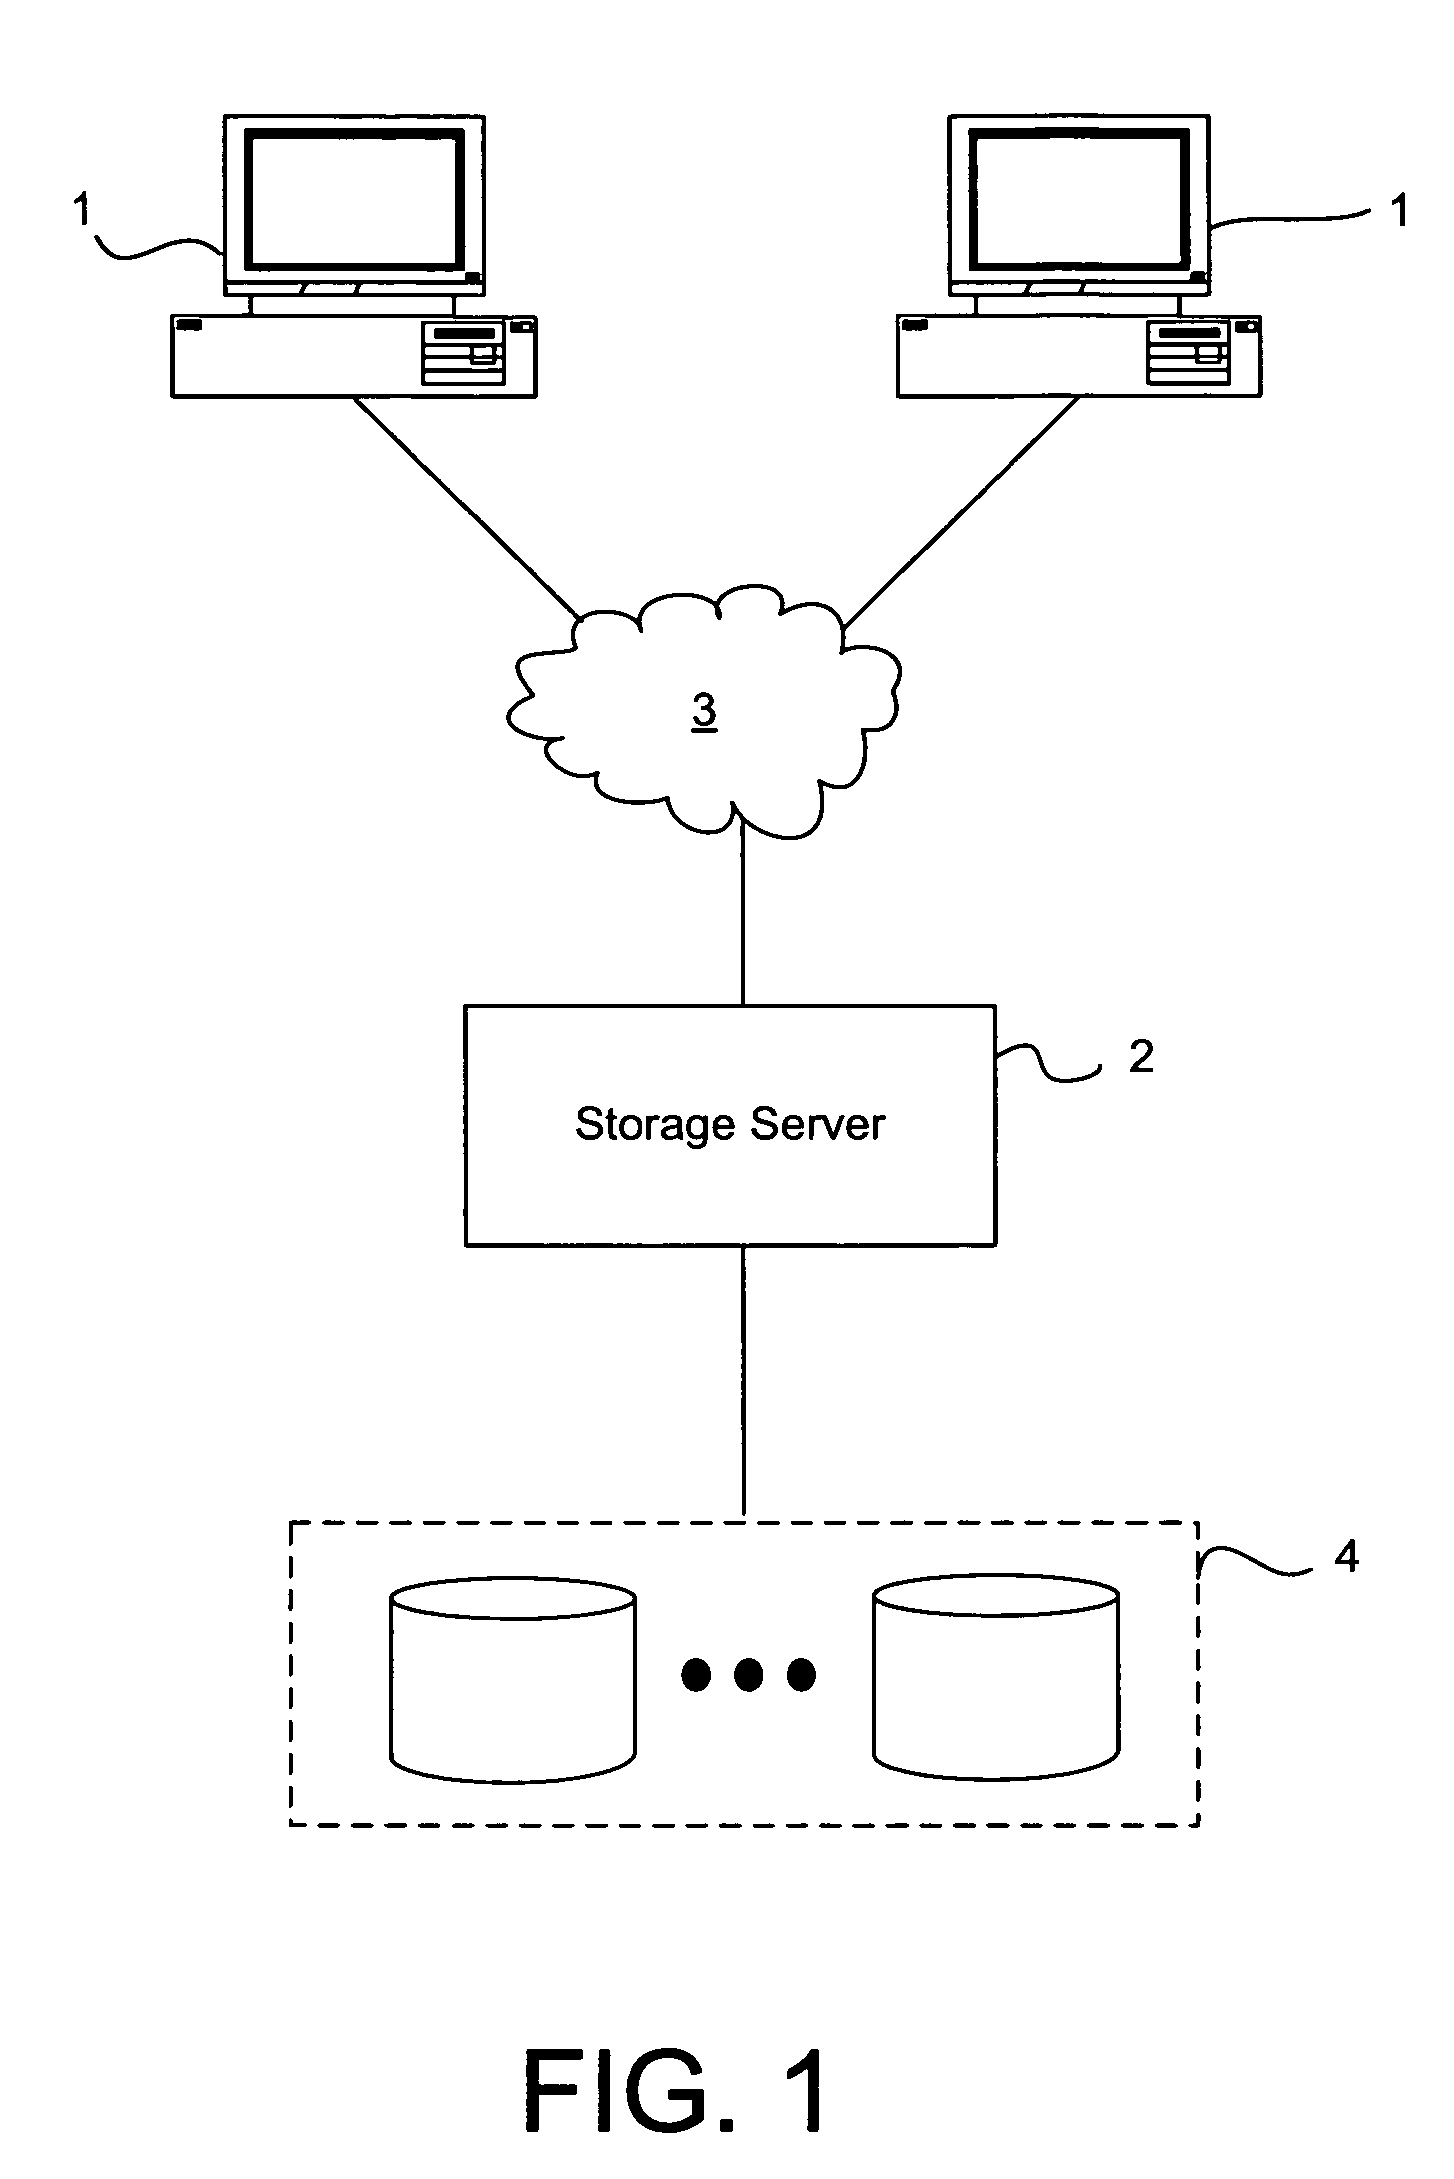 Method and system to make a read-only file system appear to be writeable